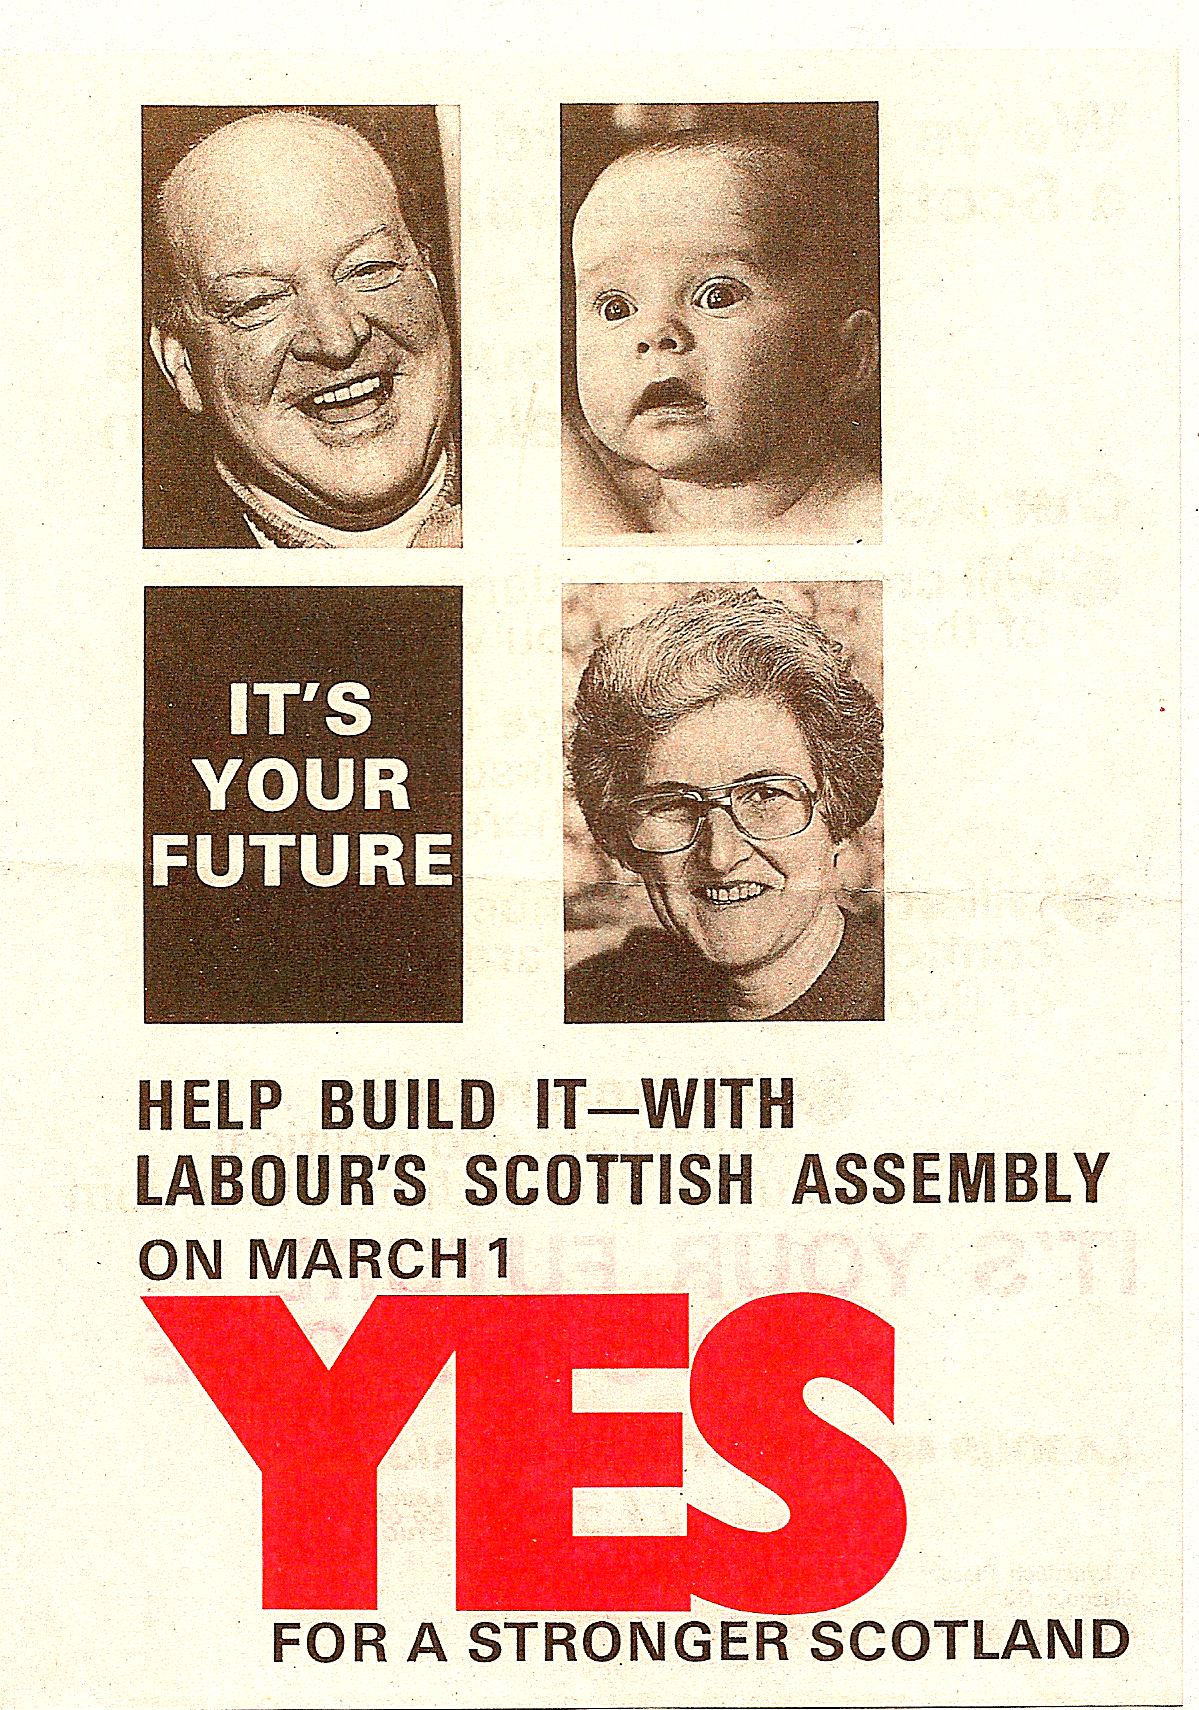 Sepia-coloured poster from 1979 referendum, urging Scots to vote 'Yes' to the Labour Party's Assembly proposals.